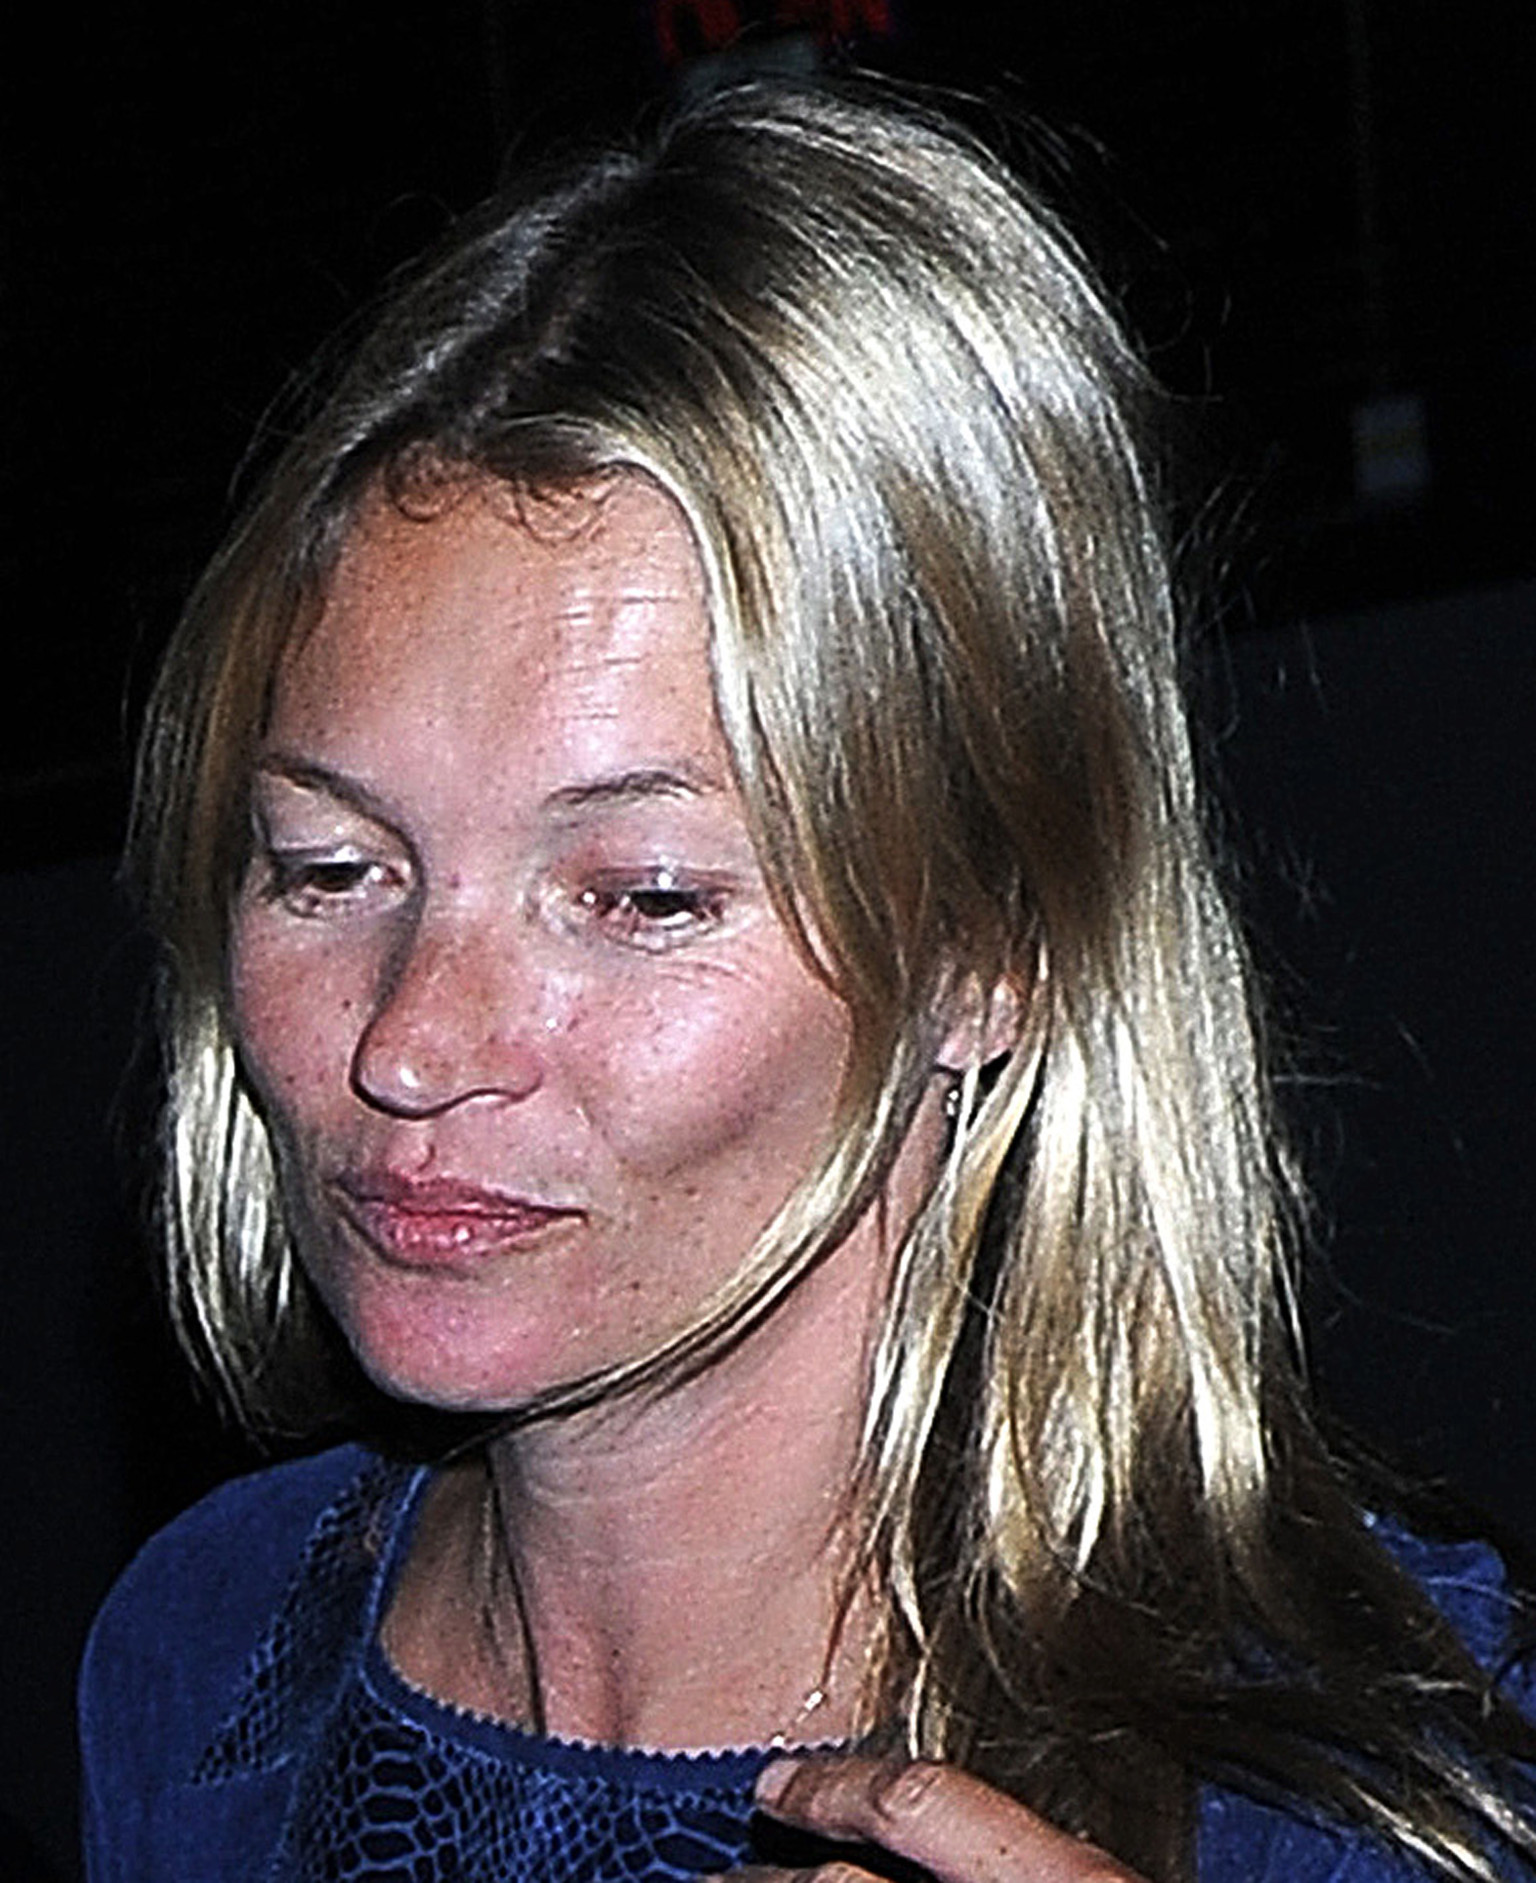 Kate Moss Goes Without Make-Up On London Night Out (PICTURES) | HuffPost UK